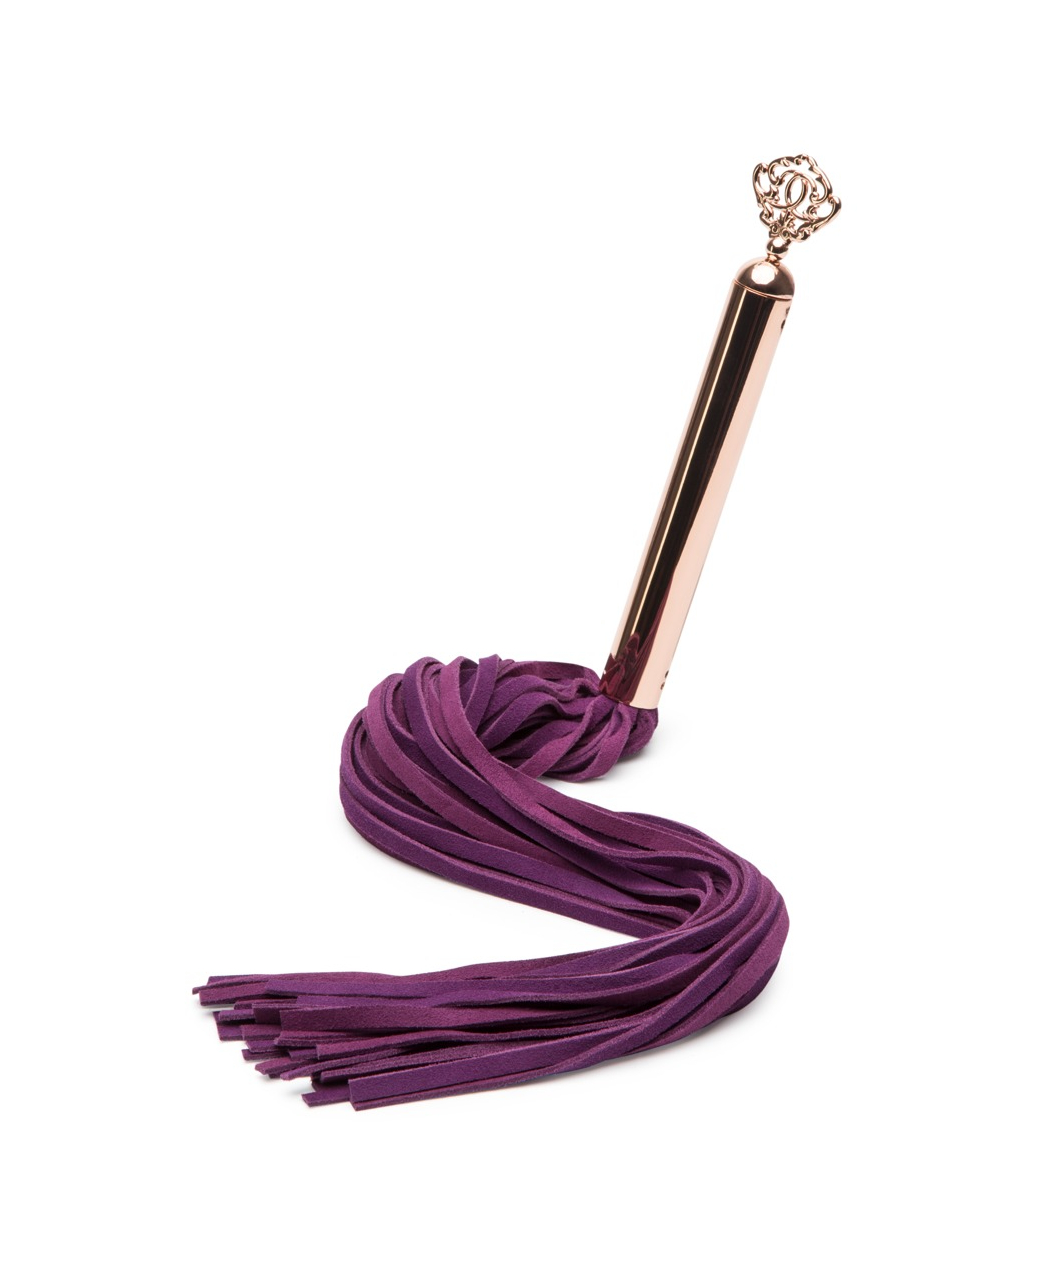 Fifty Shades of Grey Freed Cherished Suede Flogger